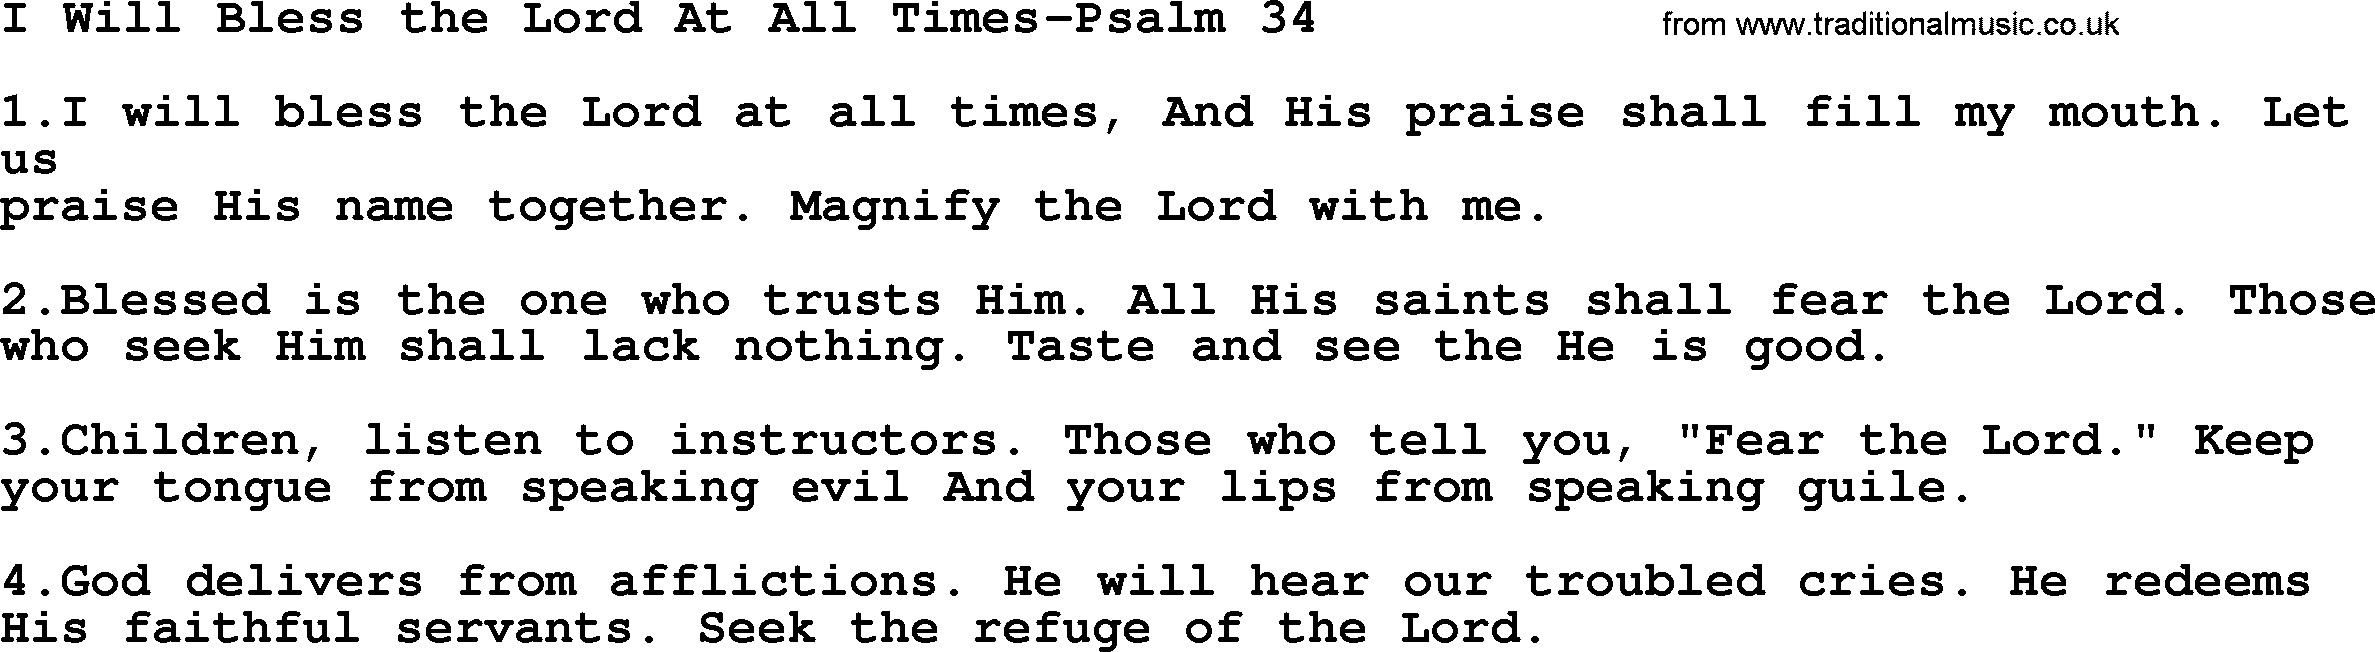 Hymns from the Psalms, Hymn: I Will Bless The Lord At All Times-Psalm 34, lyrics with PDF